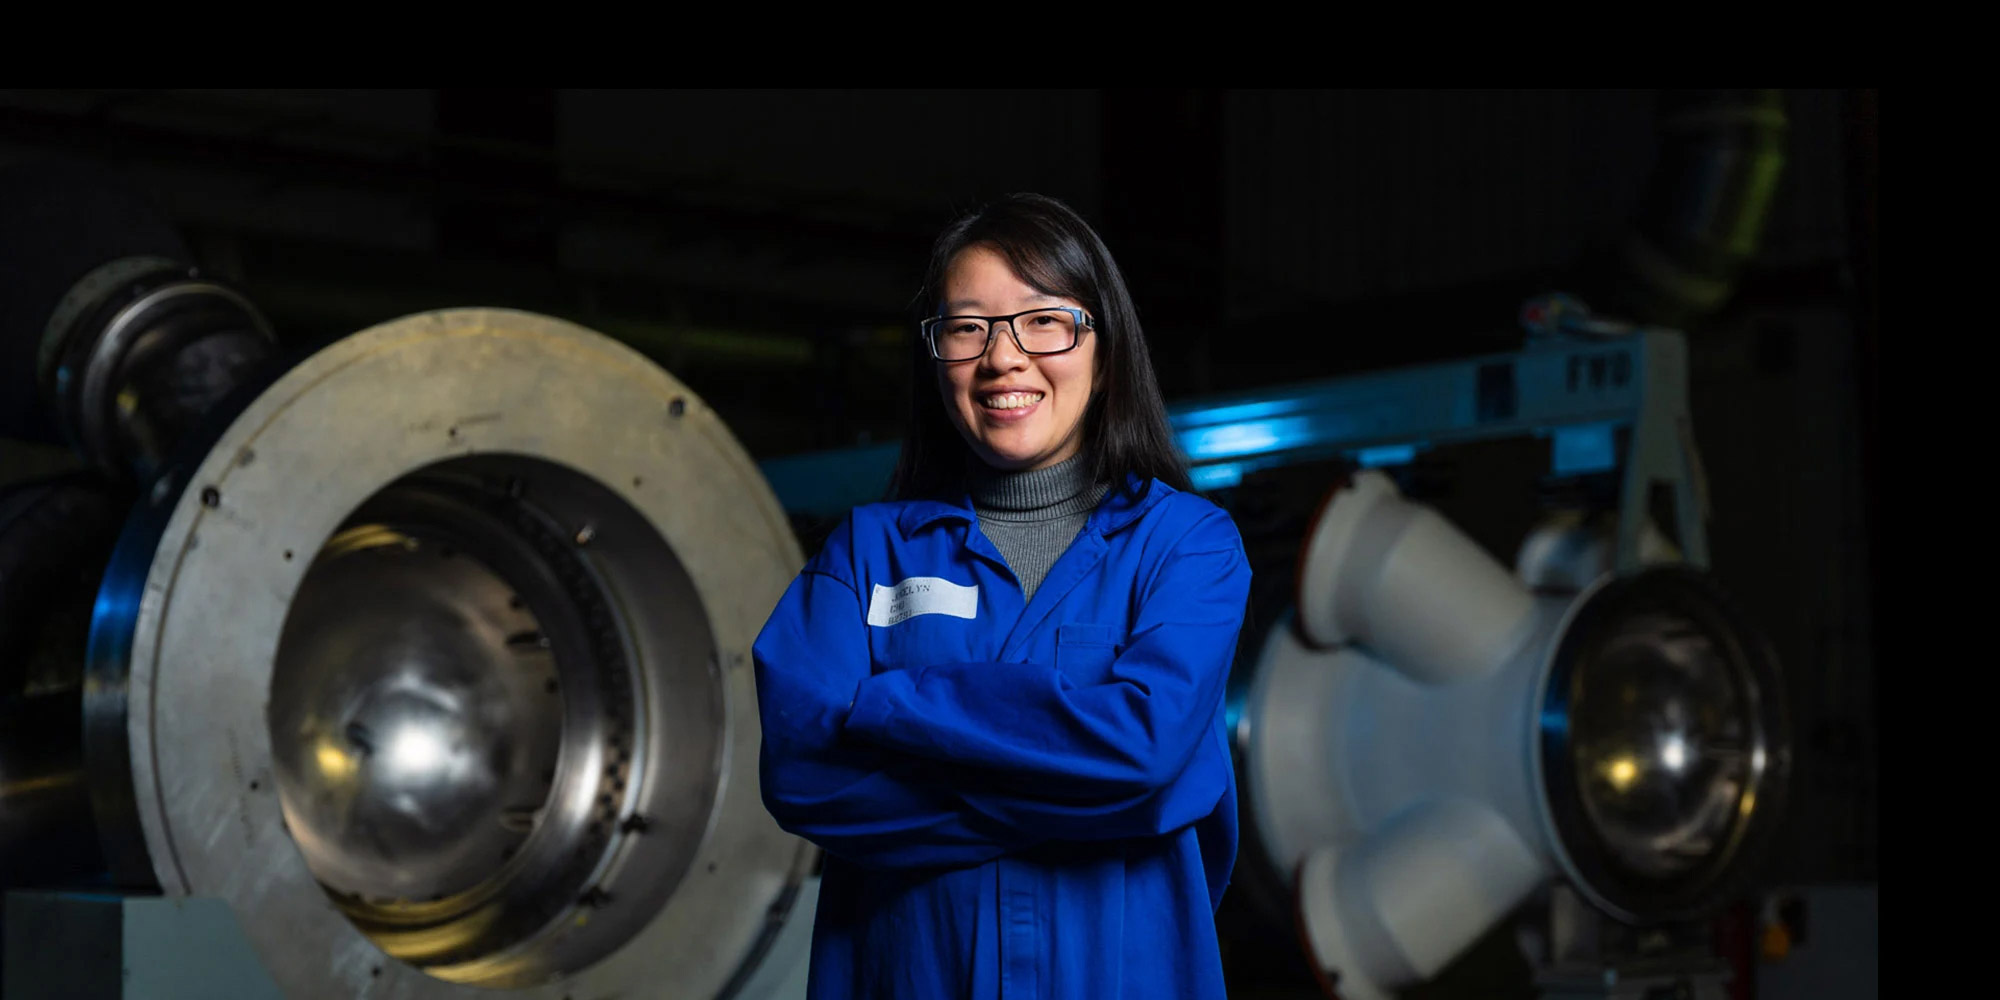 Female employee smiling with arms crossed